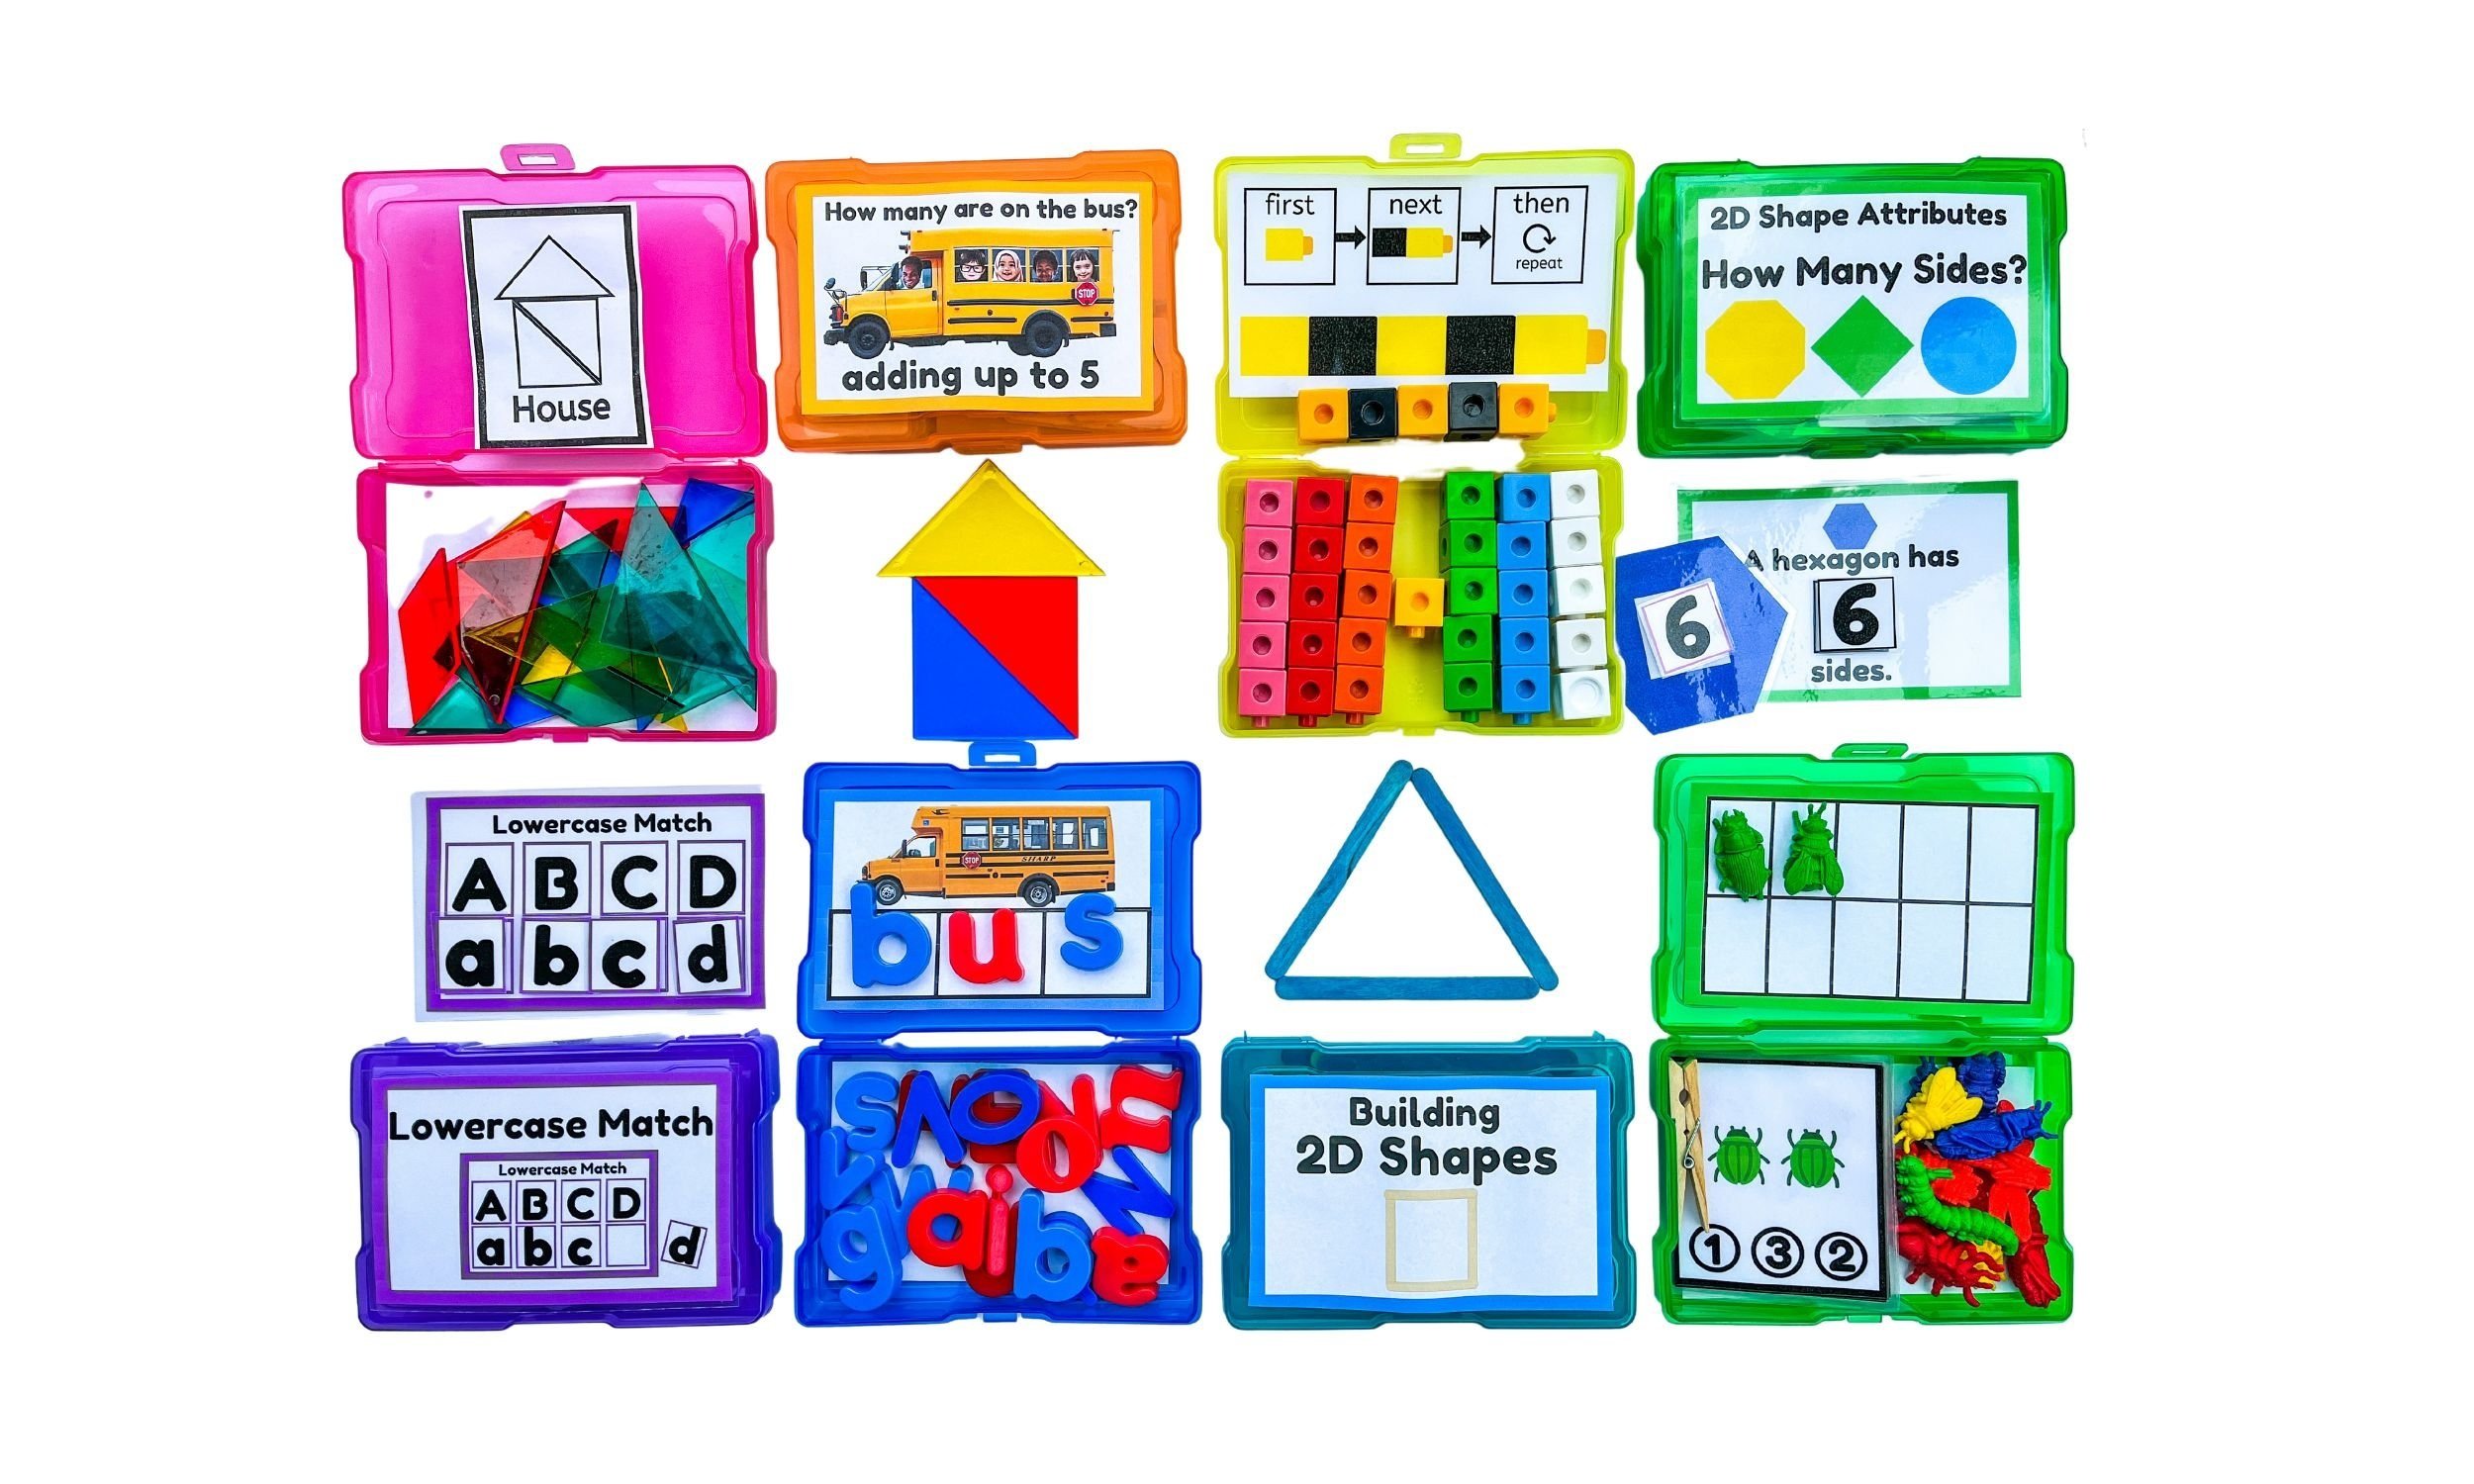 FREE Task Box Activities for Autism